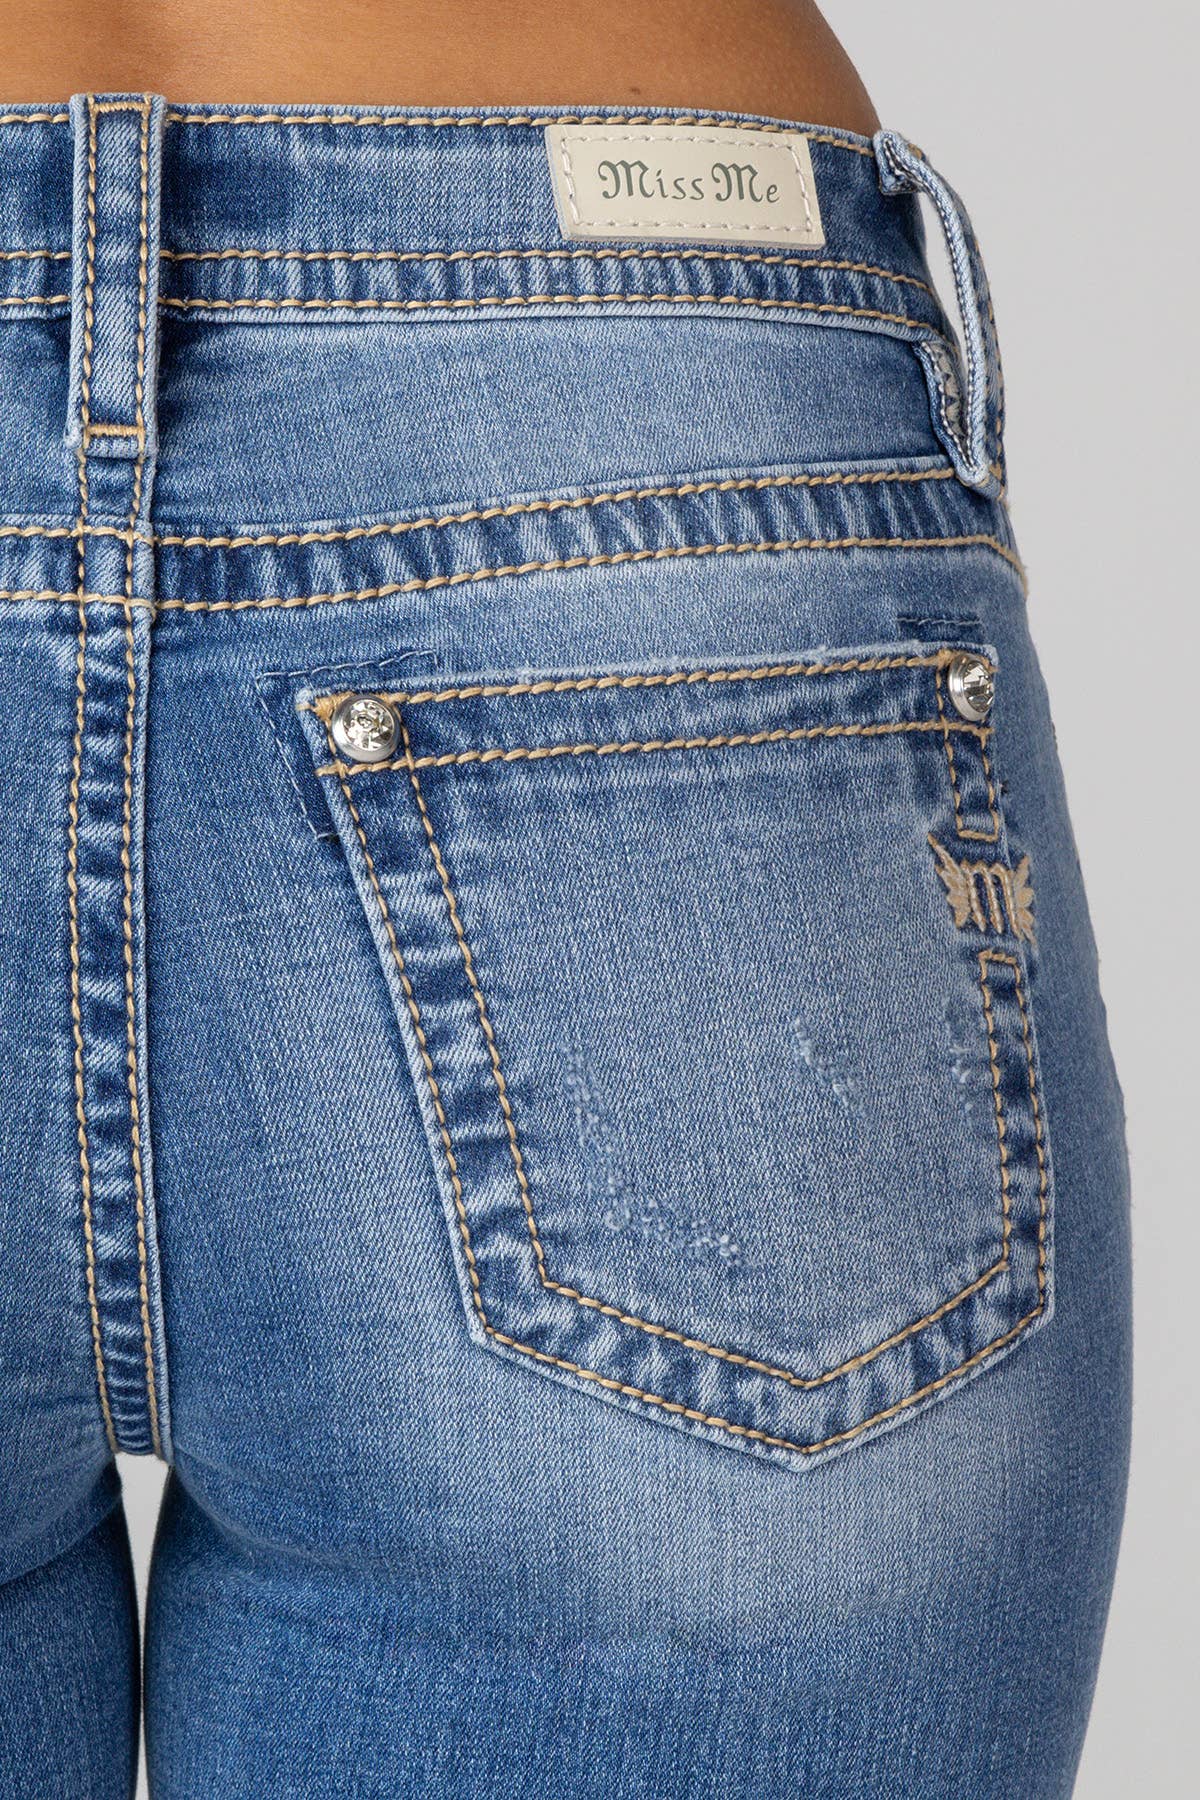 MISS ME MID-RISE BOOTCUT DISTRESSED JEAN